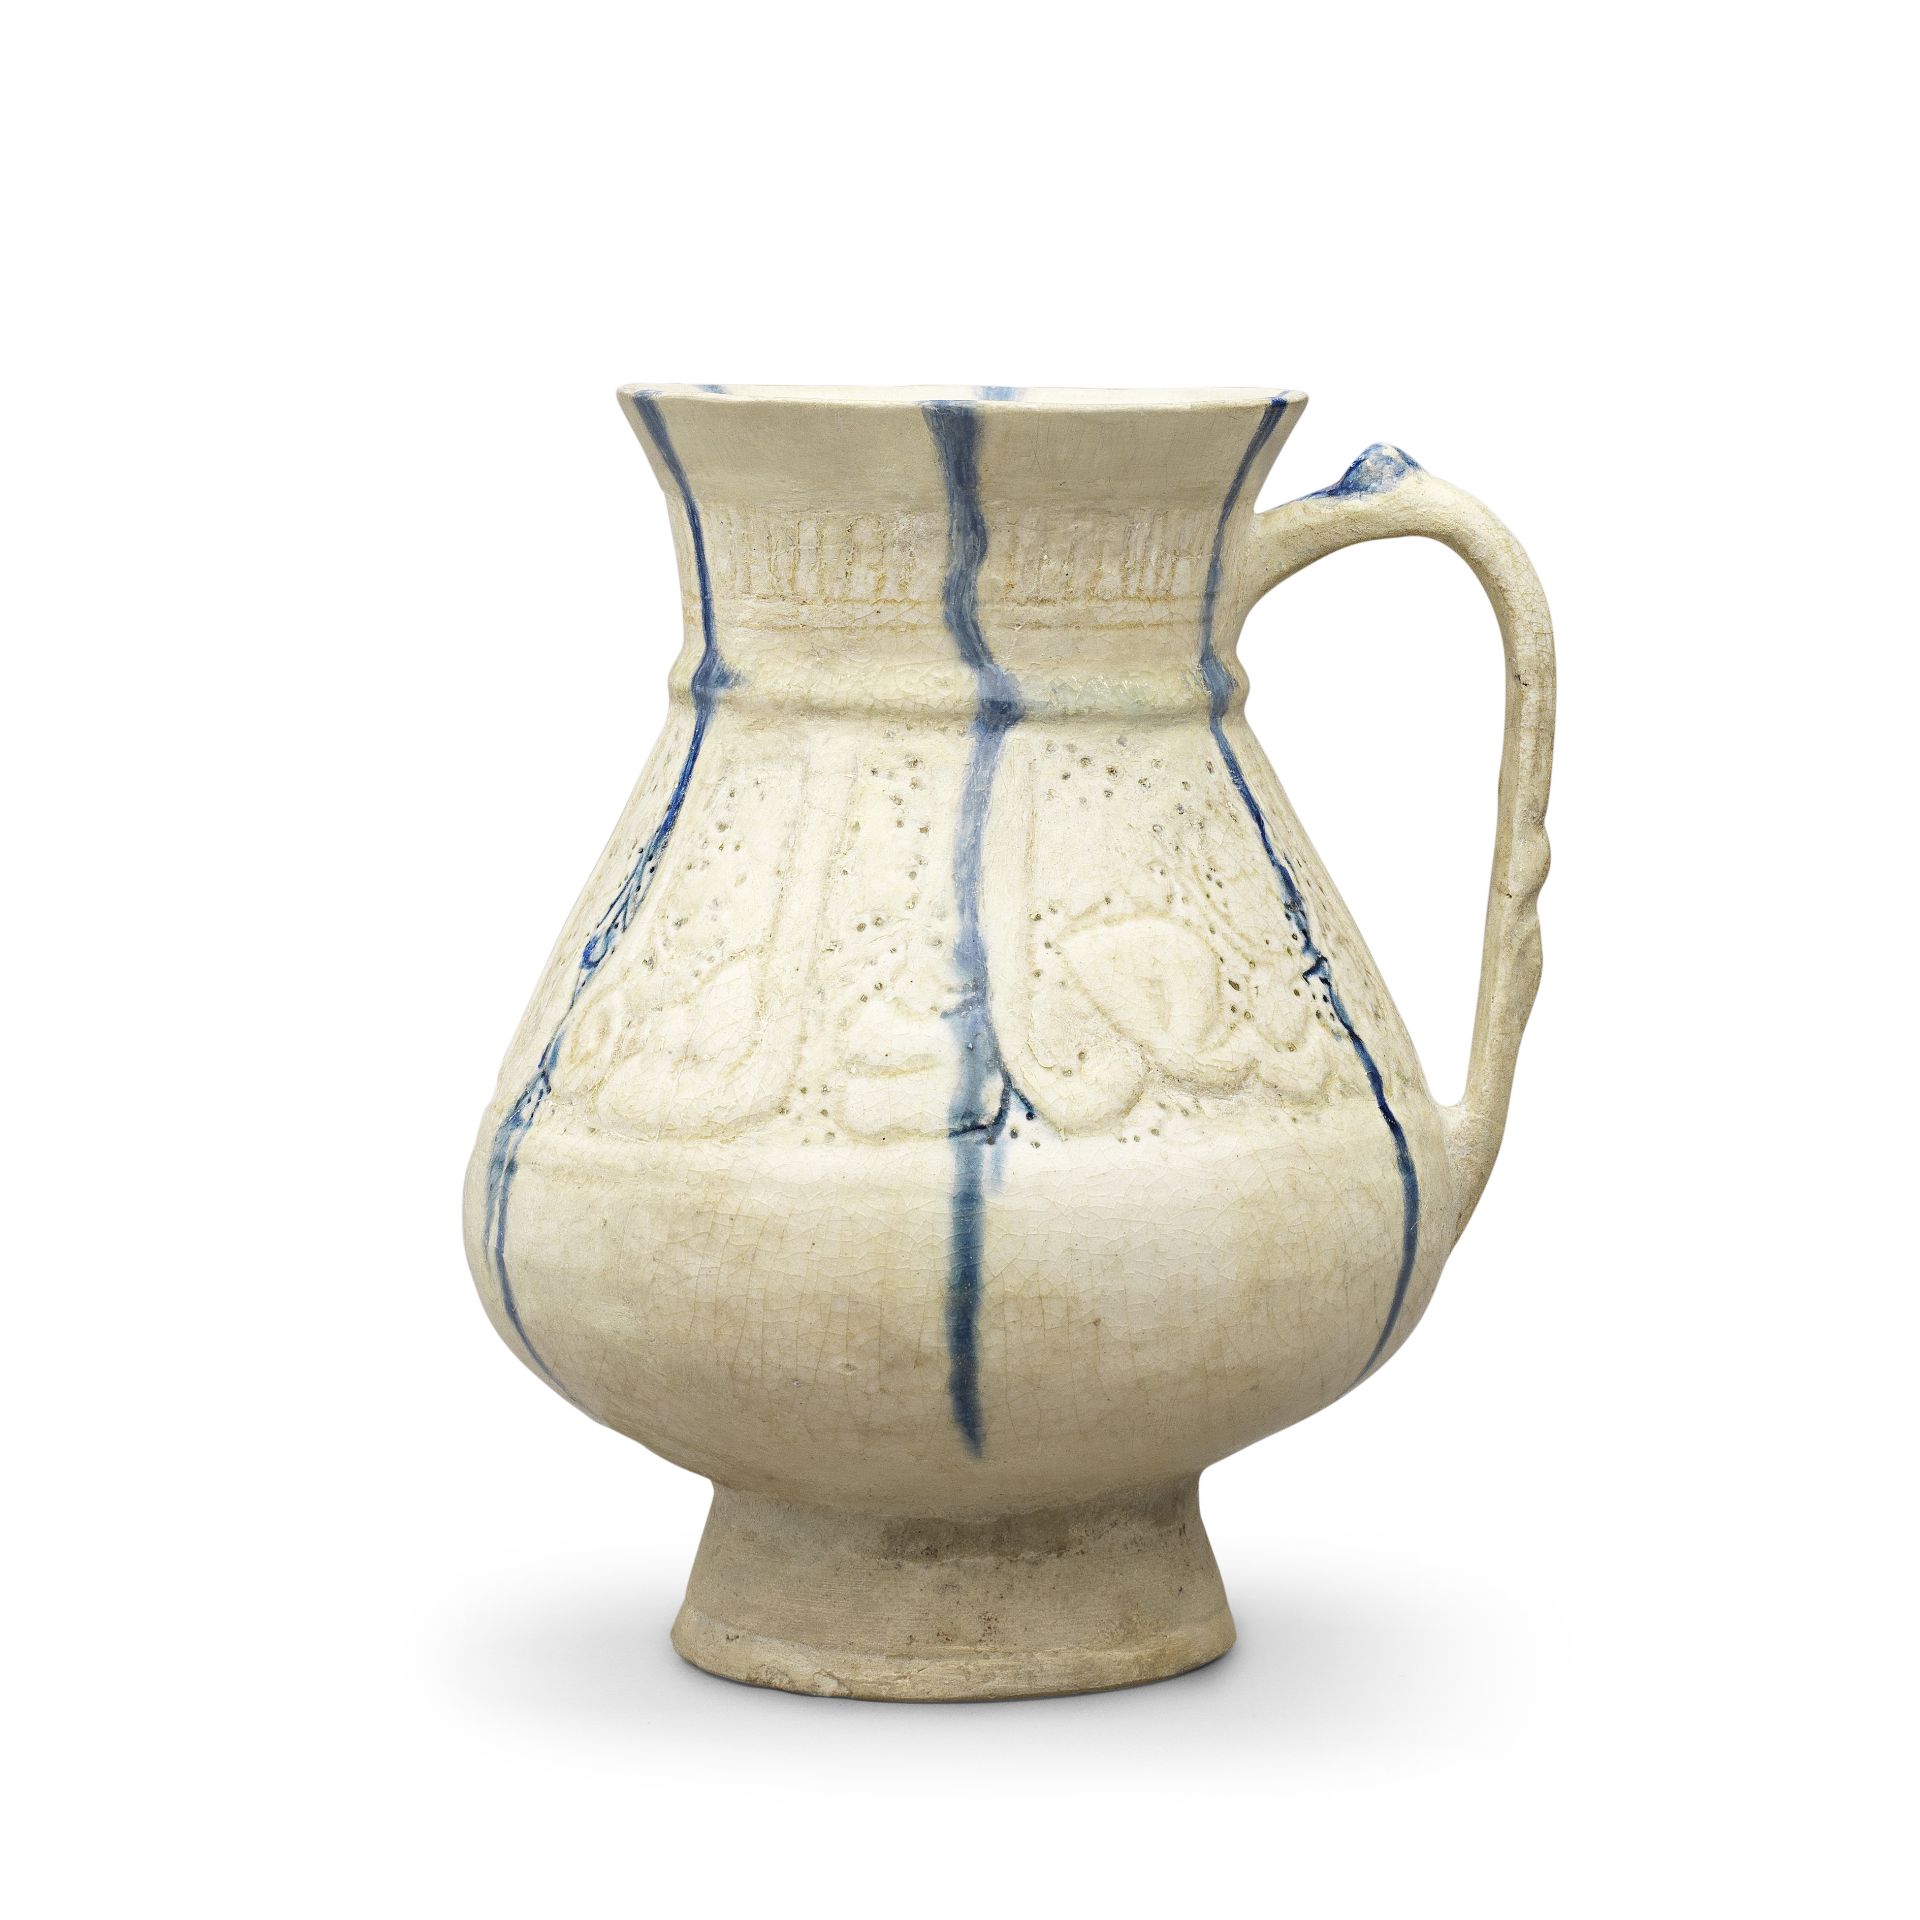 A Kashan pierced and incised blue and white pottery jug Persia, 12th/ 13th Century